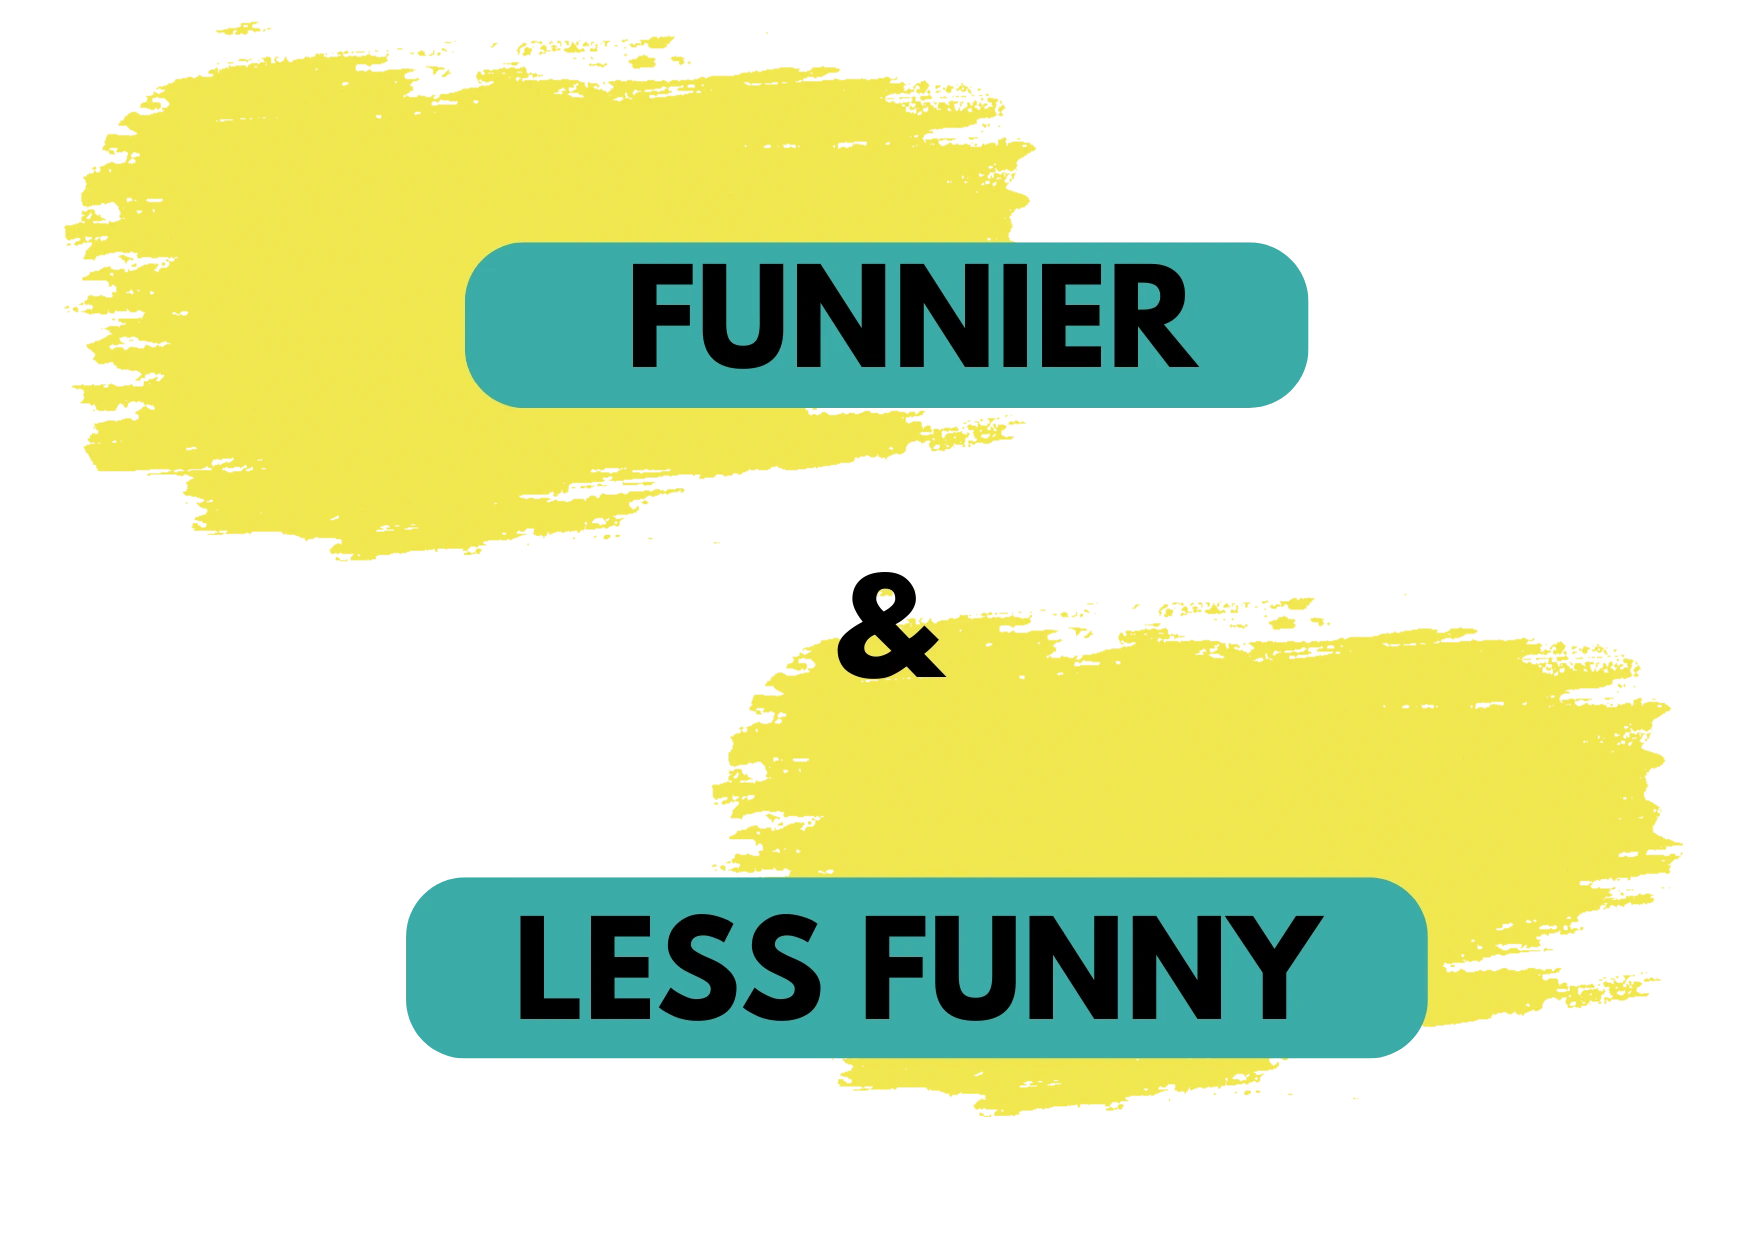 Graphic showing "Funnier" and "Less Funny"